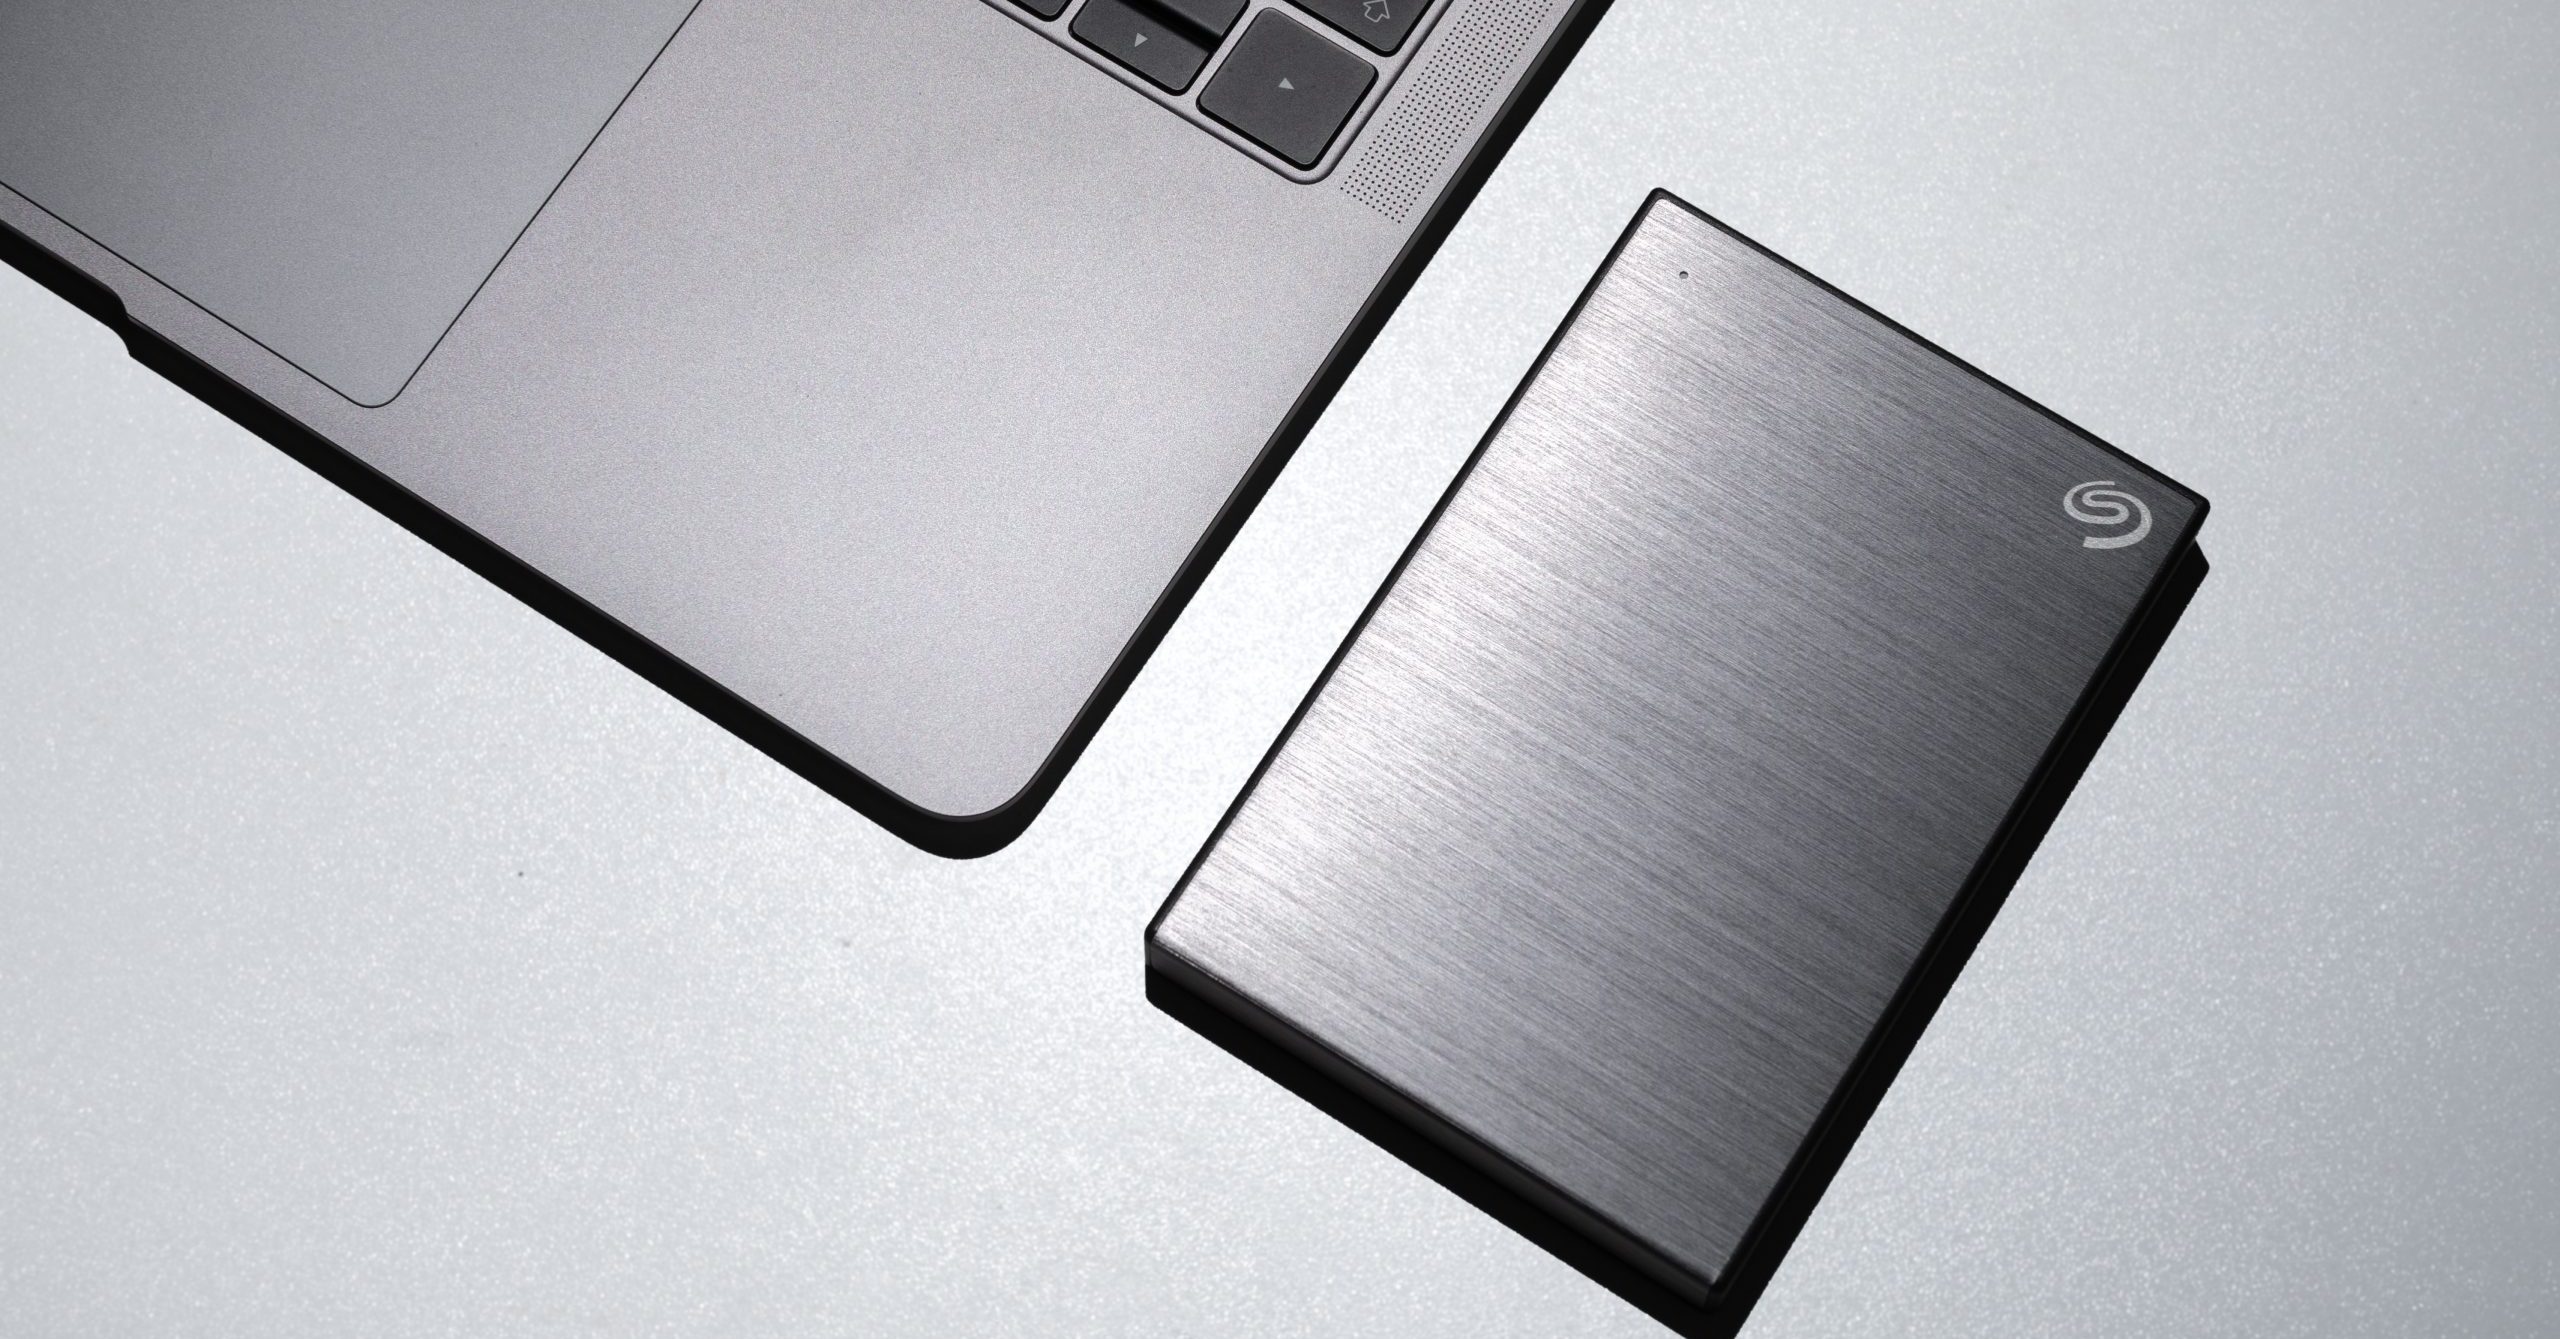 Four Things to Consider Before Buying an External Hard Drive